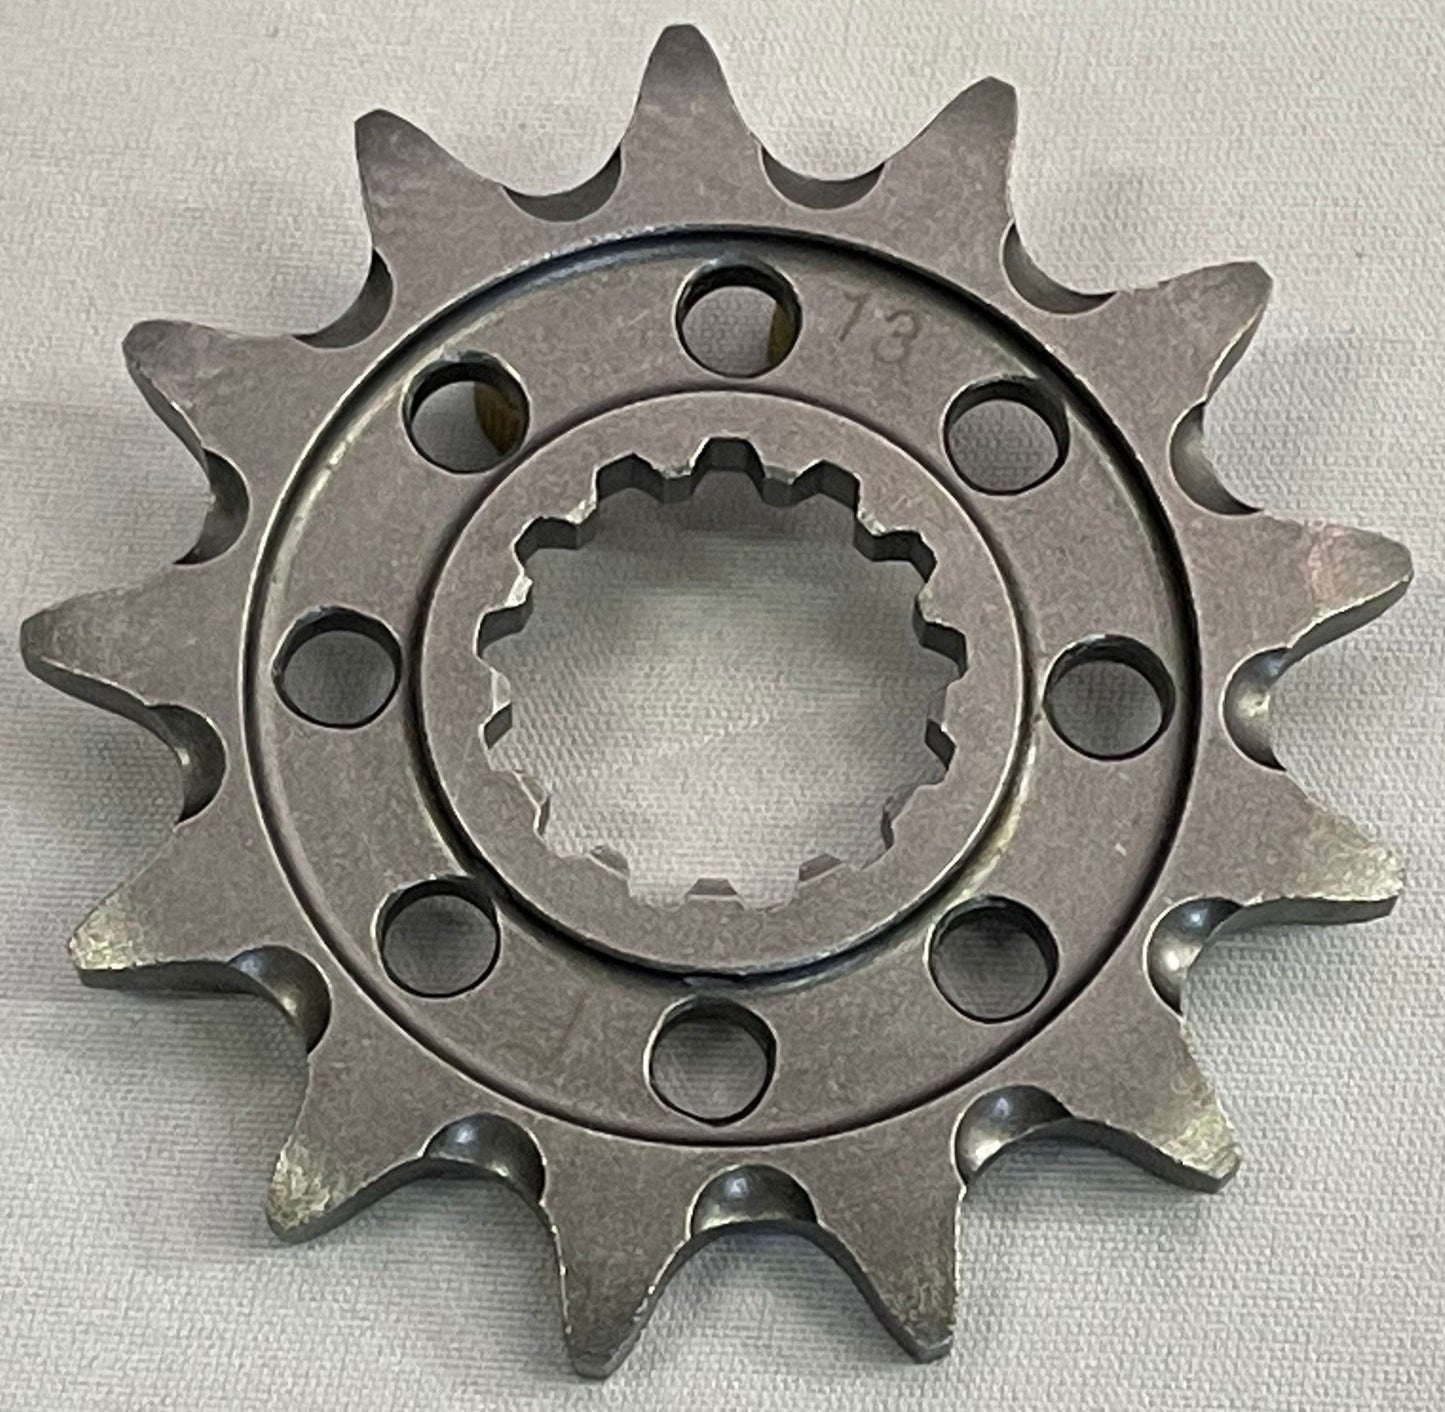 13 Tooth DDC Sprocket. Part number BB1/GB1-13